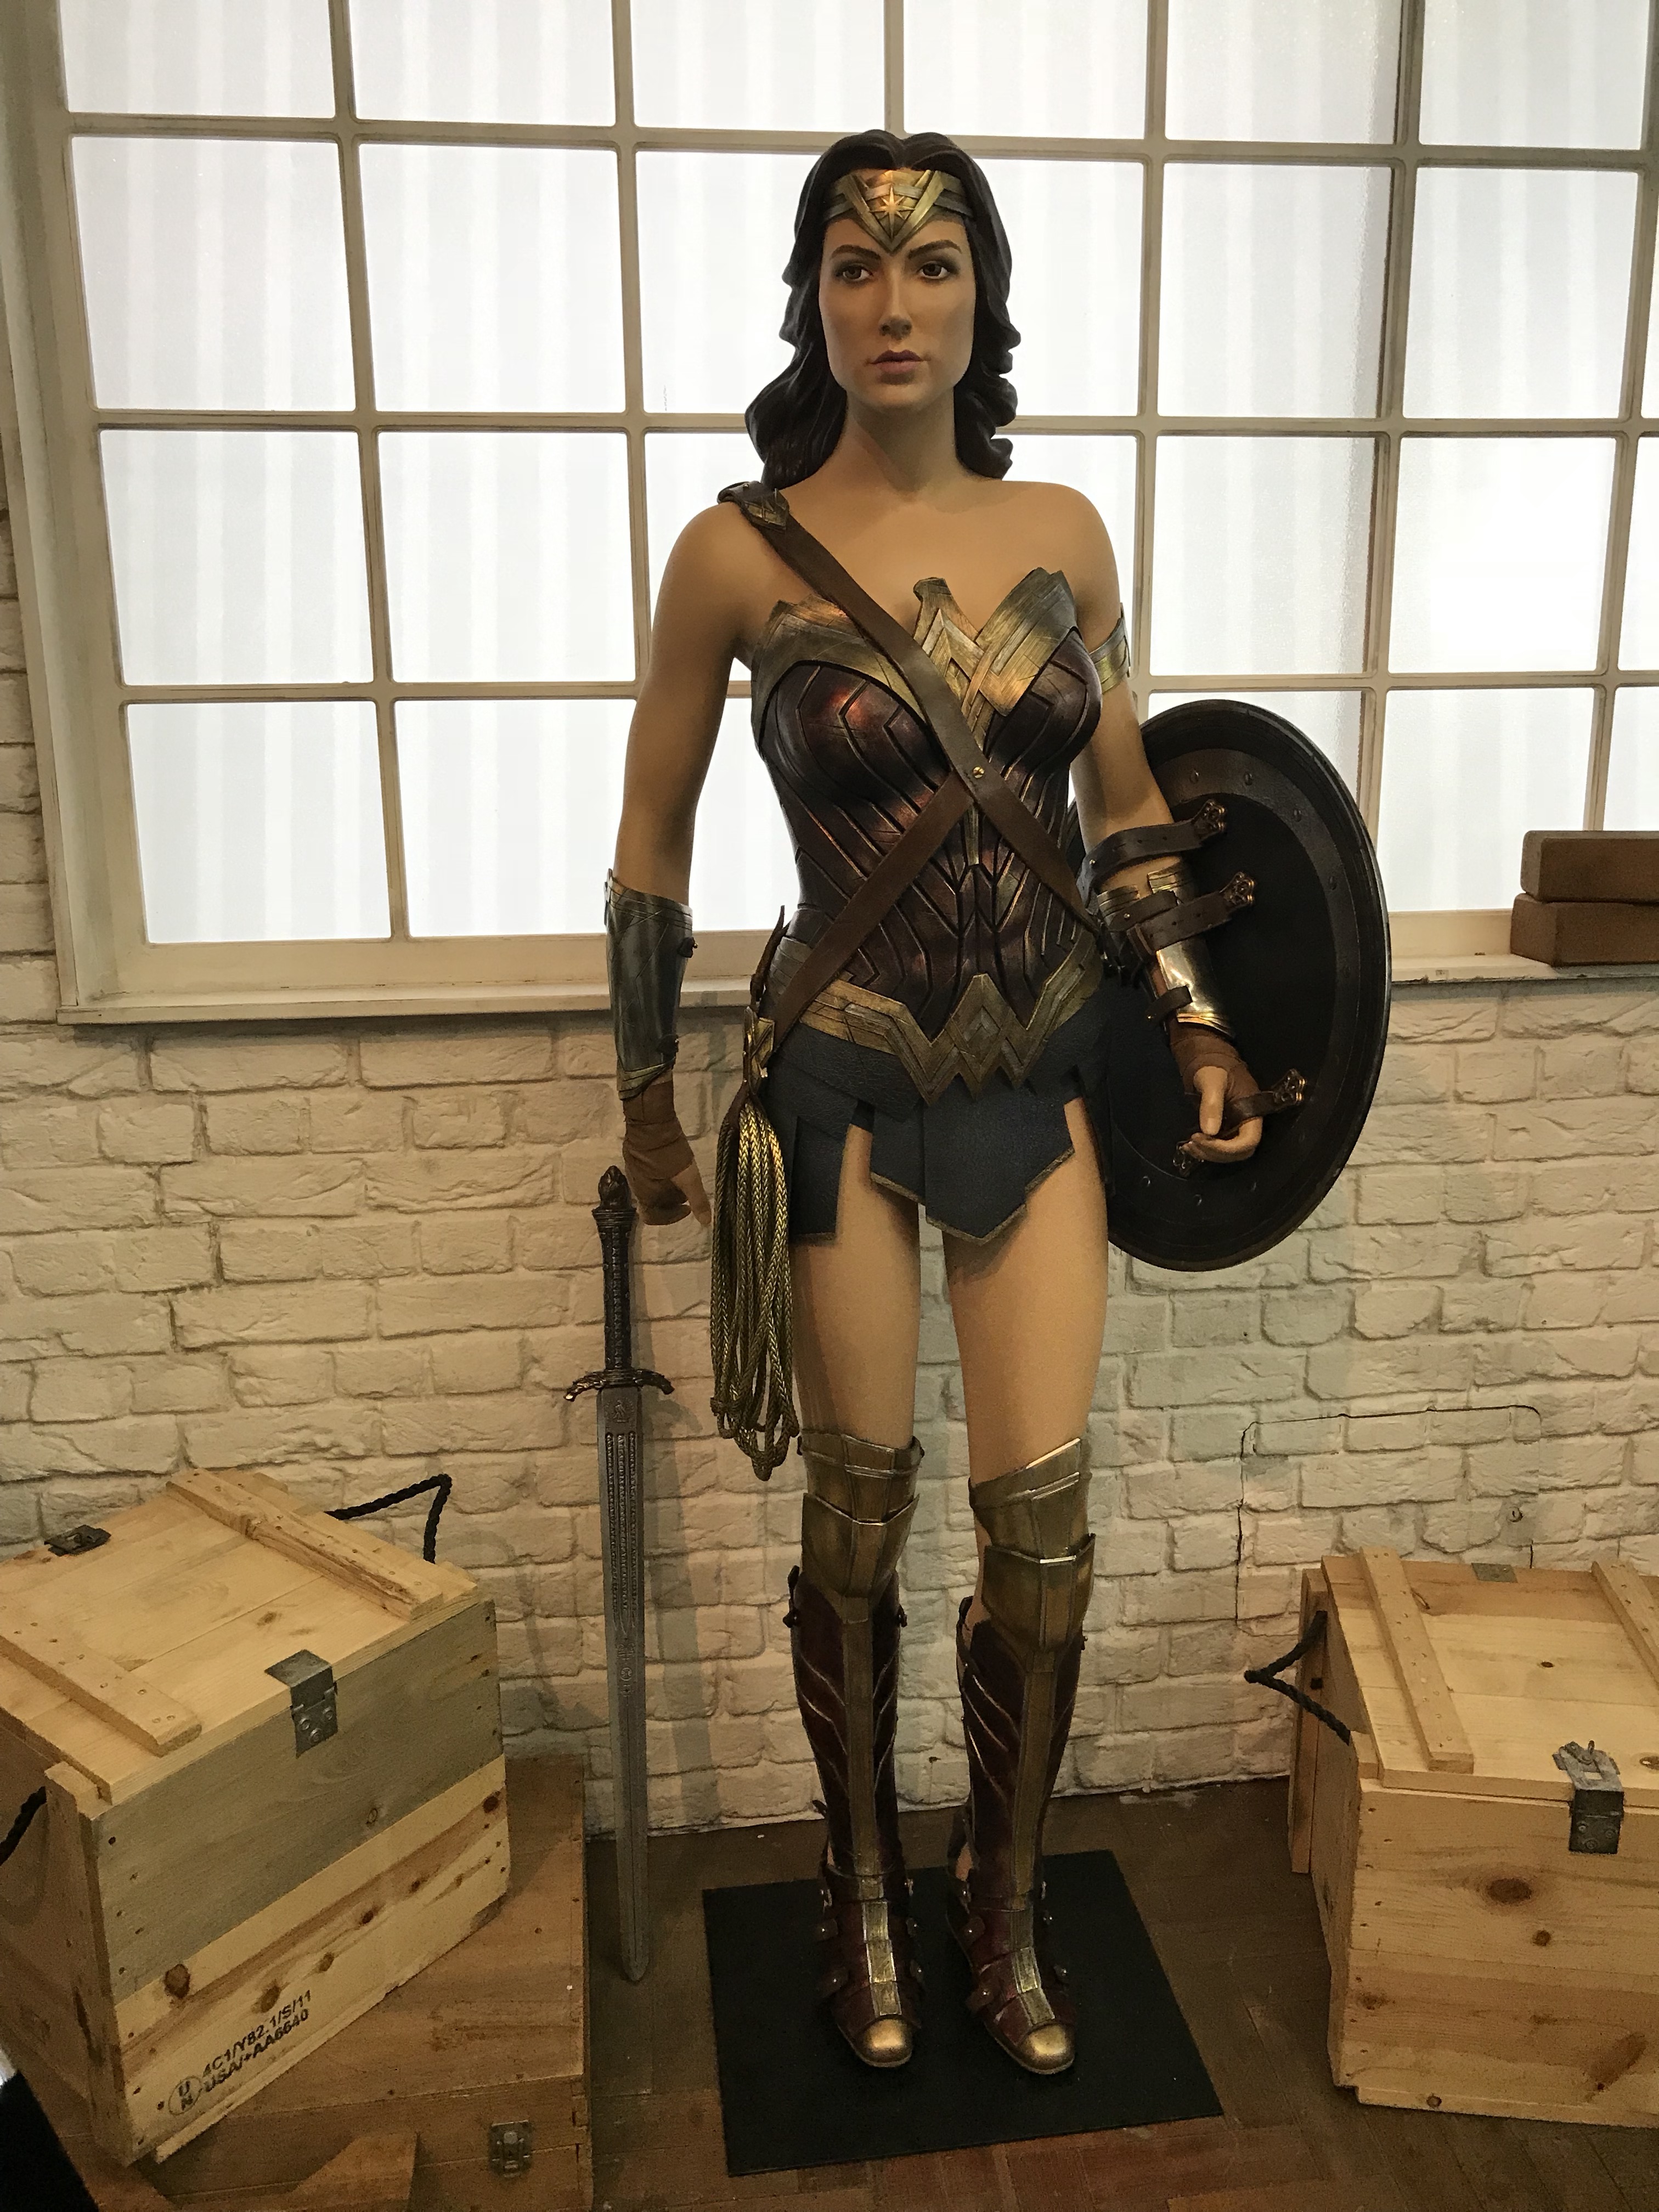 The Justice League Experience, London - Wonder Woman